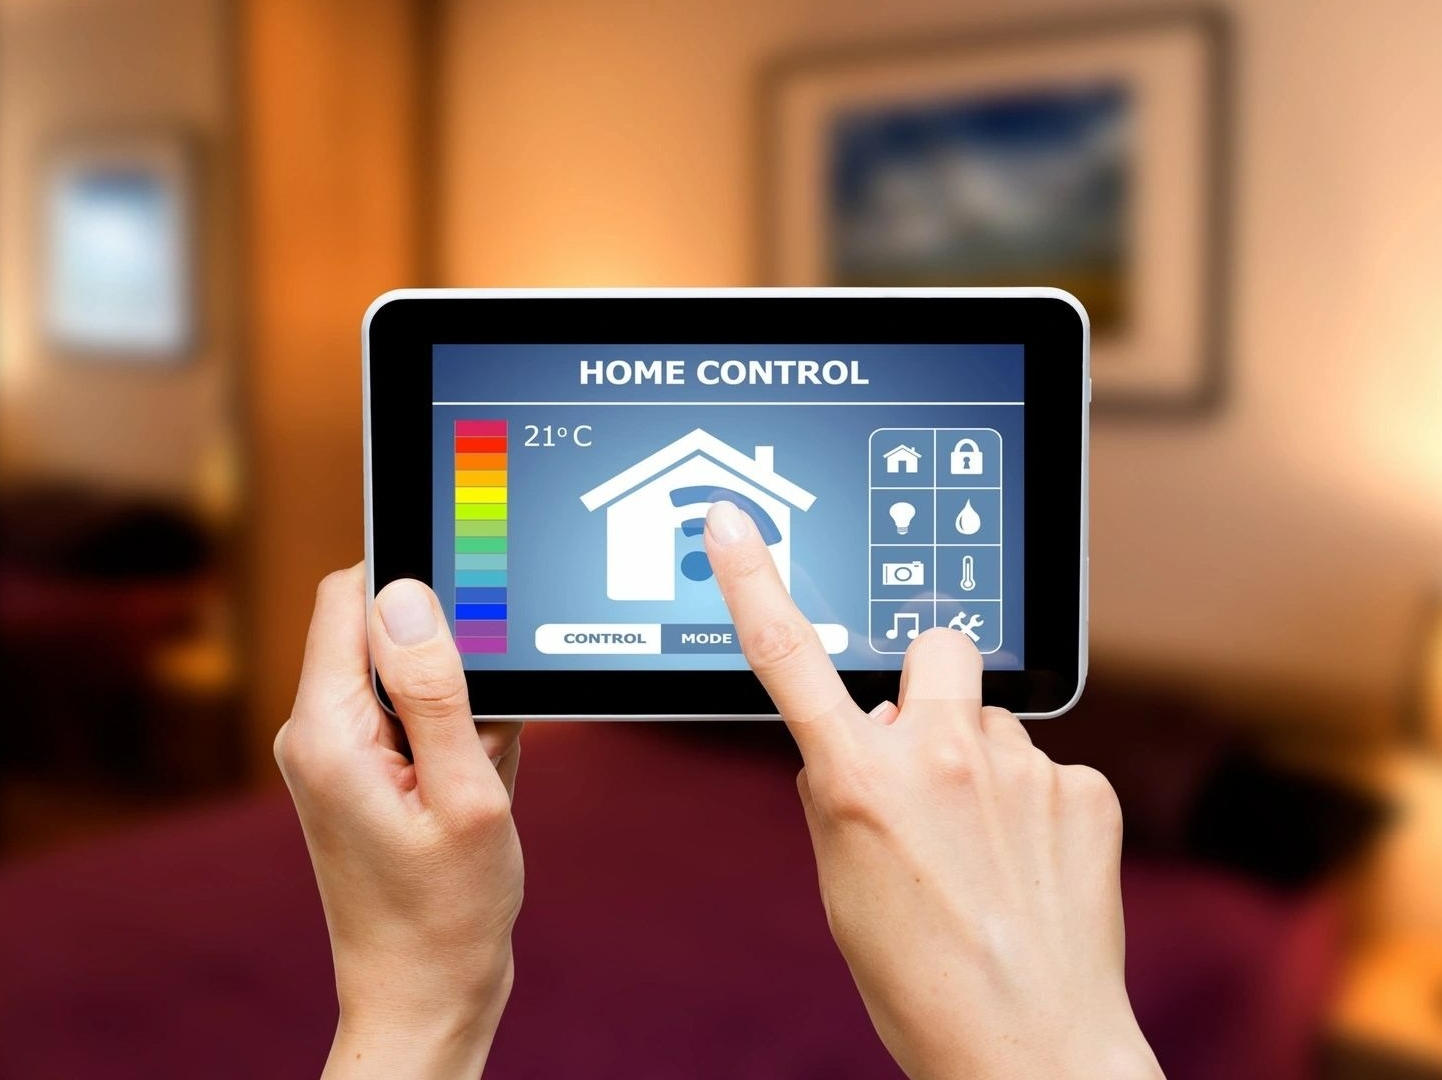 Remote Home control system on a smartphone